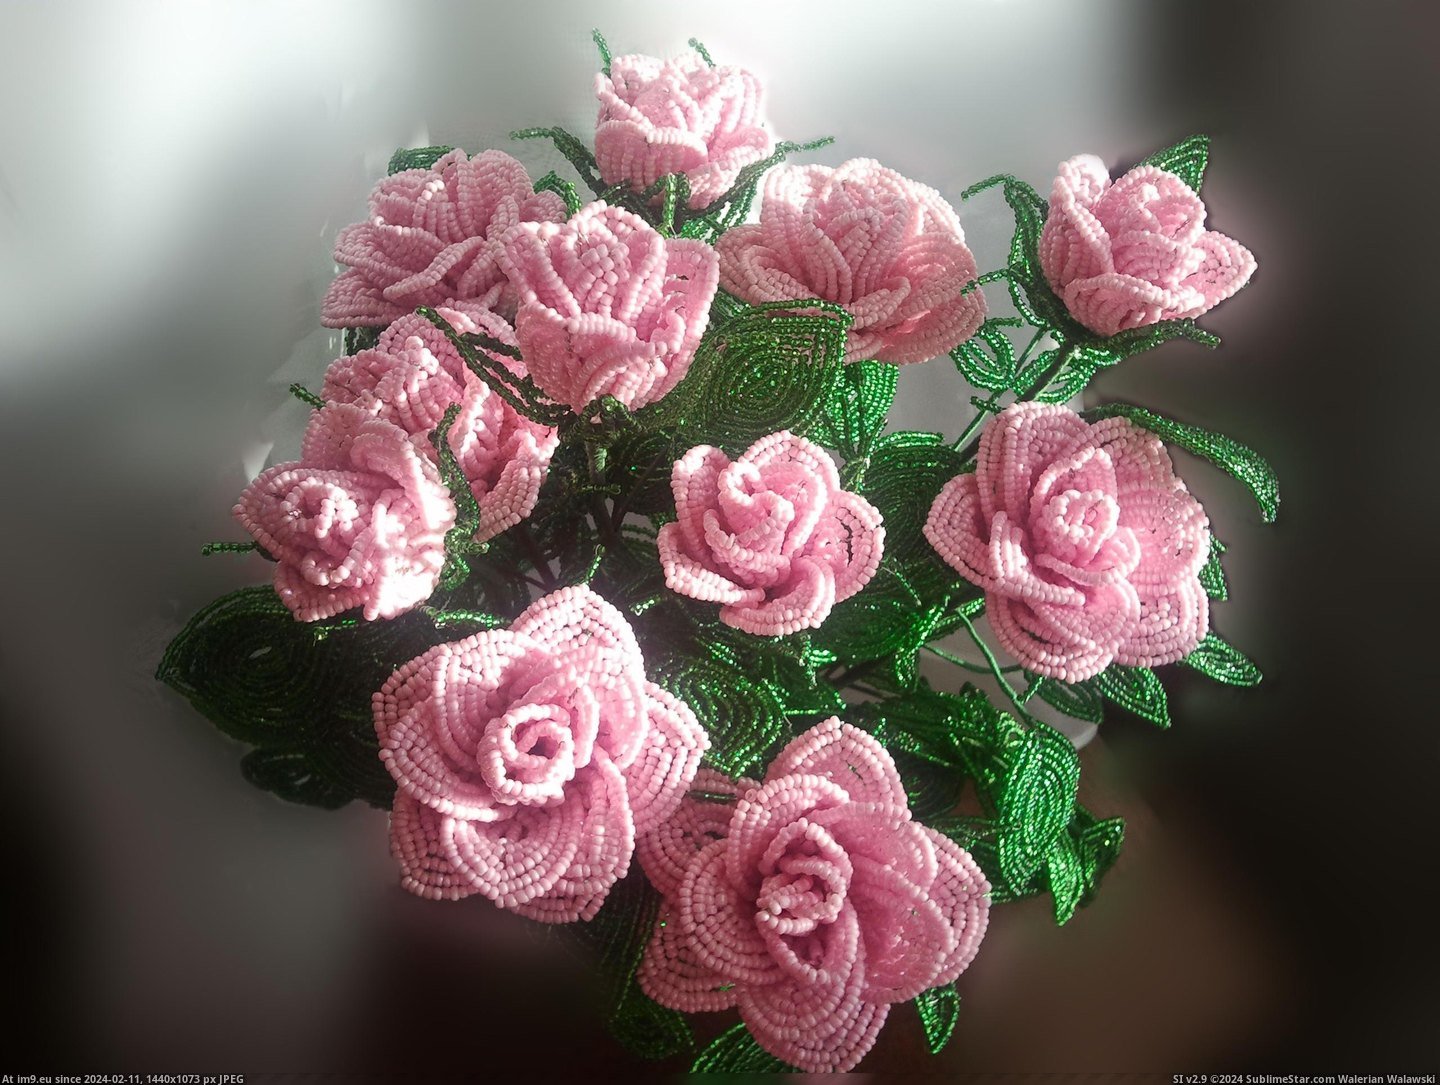 #Pink #Flowers #Bead #Roses #Craft Bead craft - flowers, pink roses Pic. (Image of album Random images))